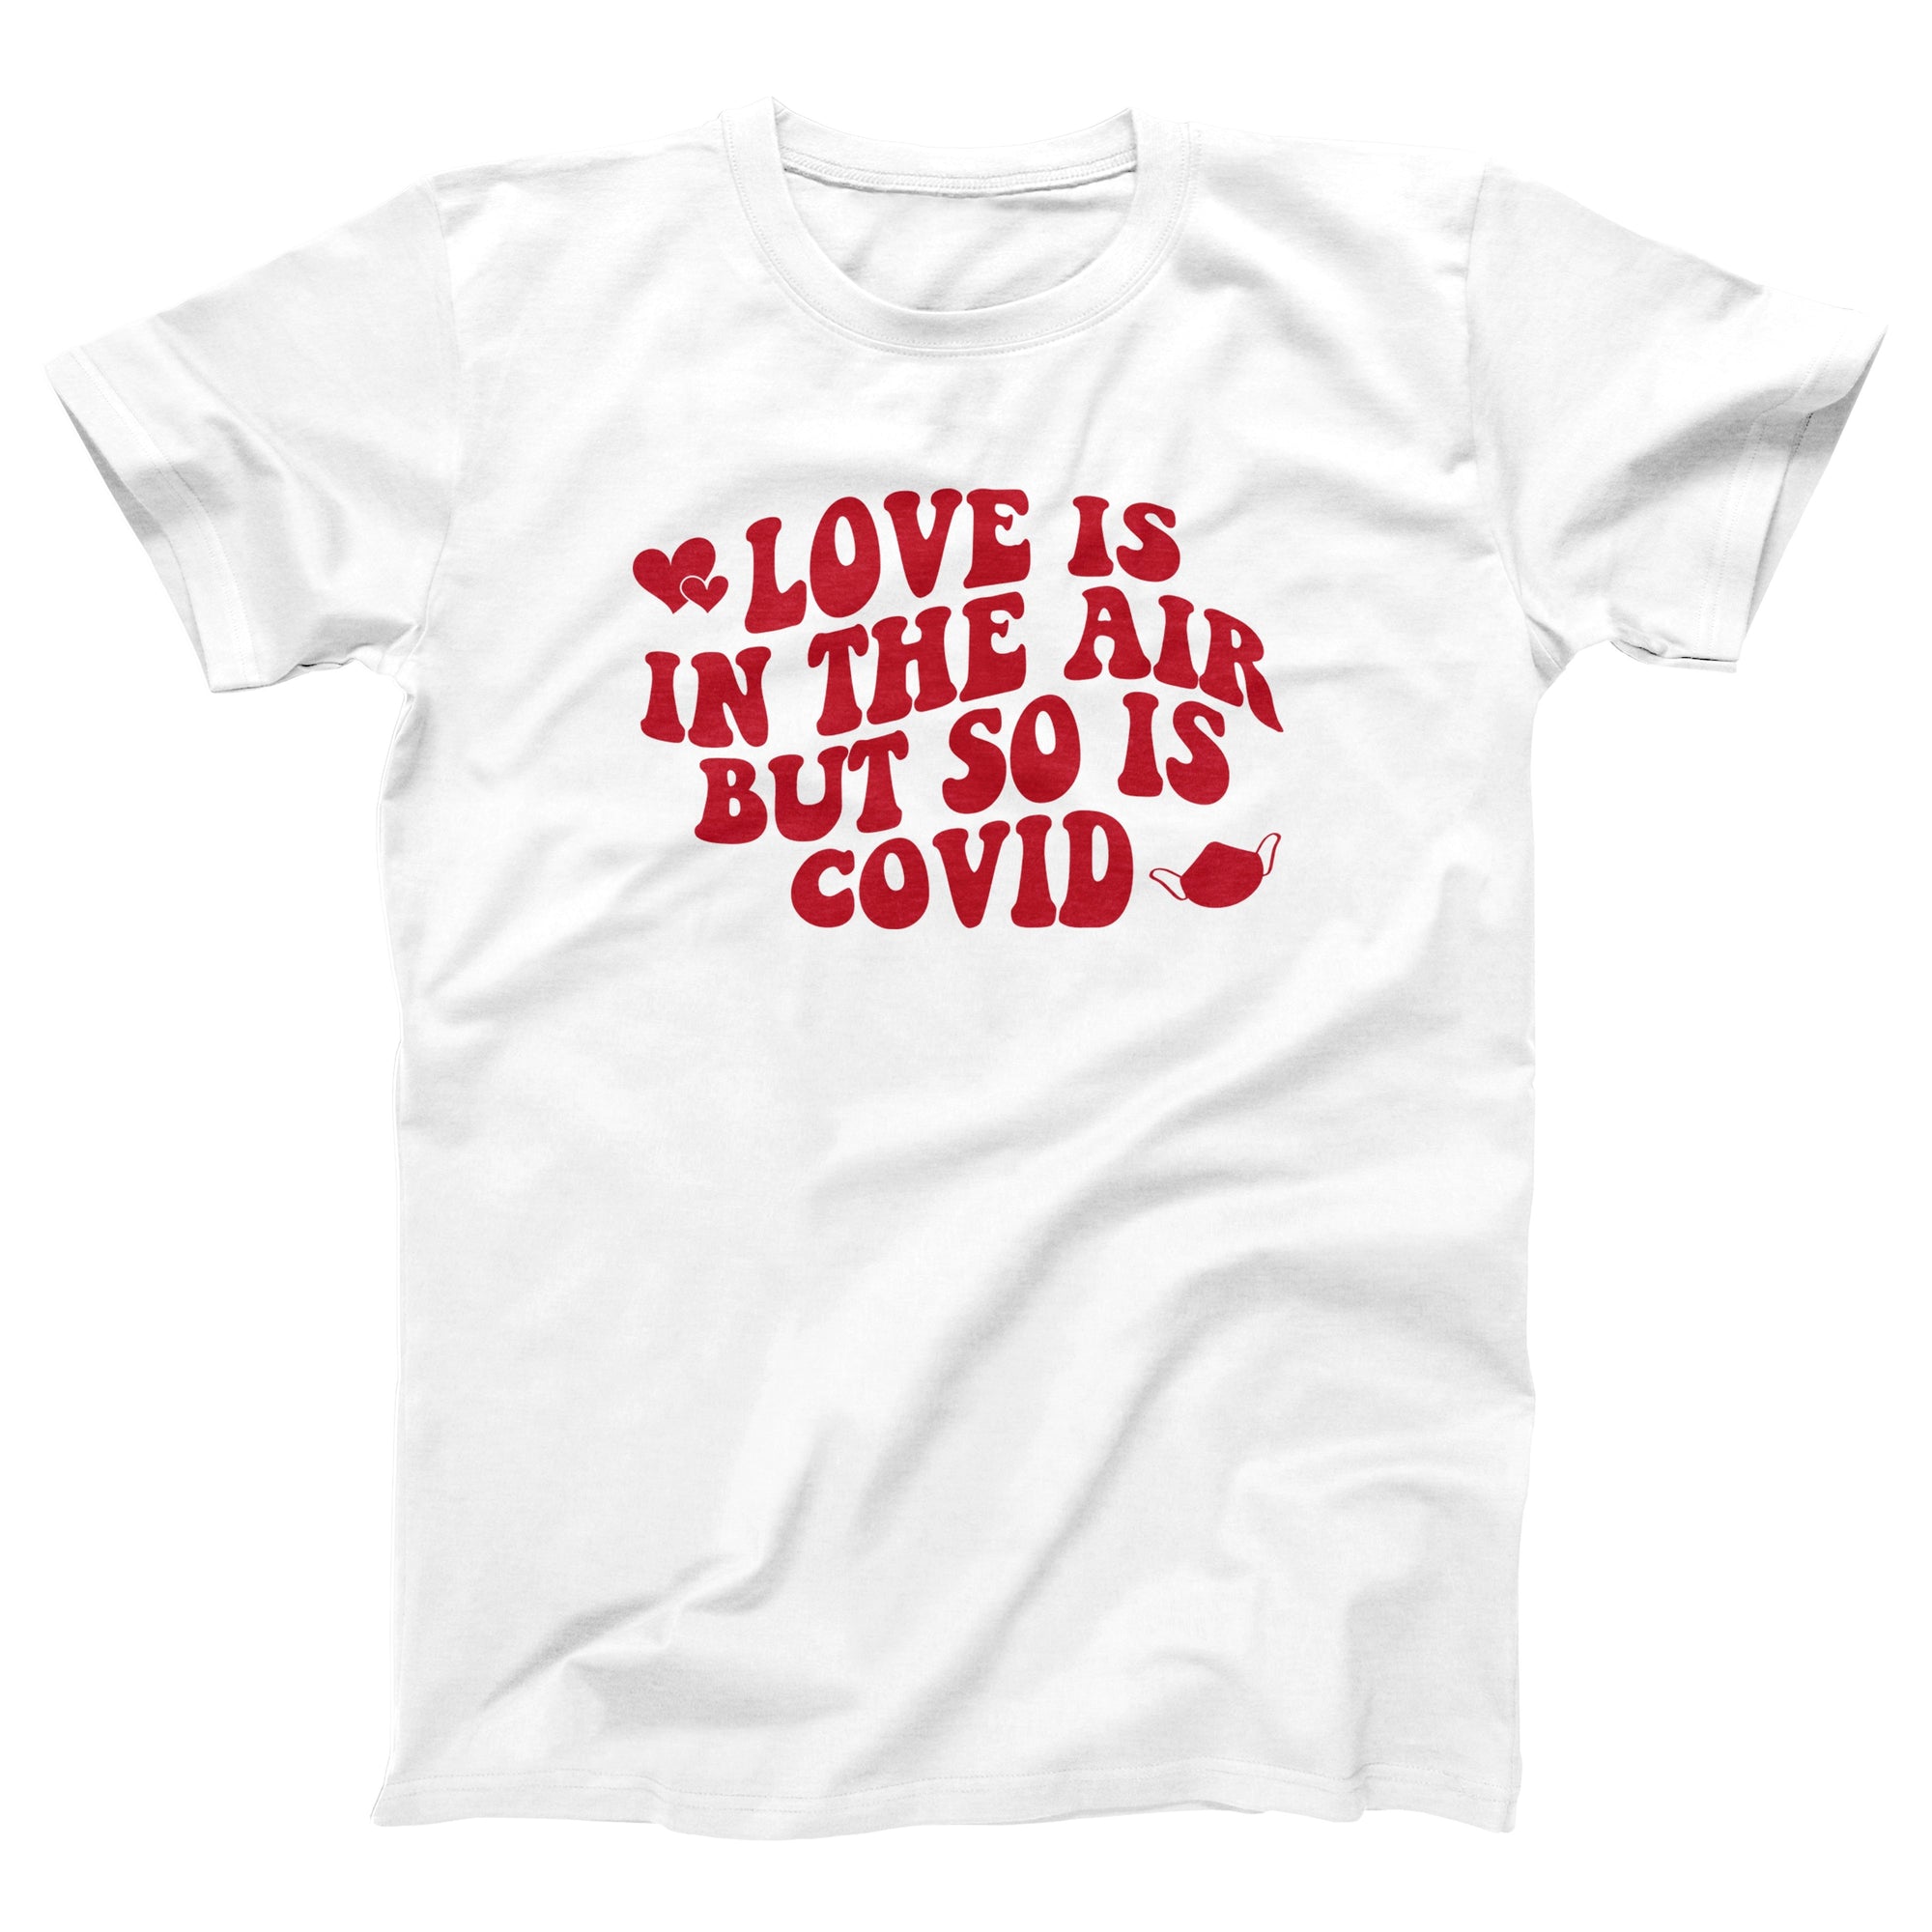 Love is in the Air Adult Unisex T-Shirt - anishphilip